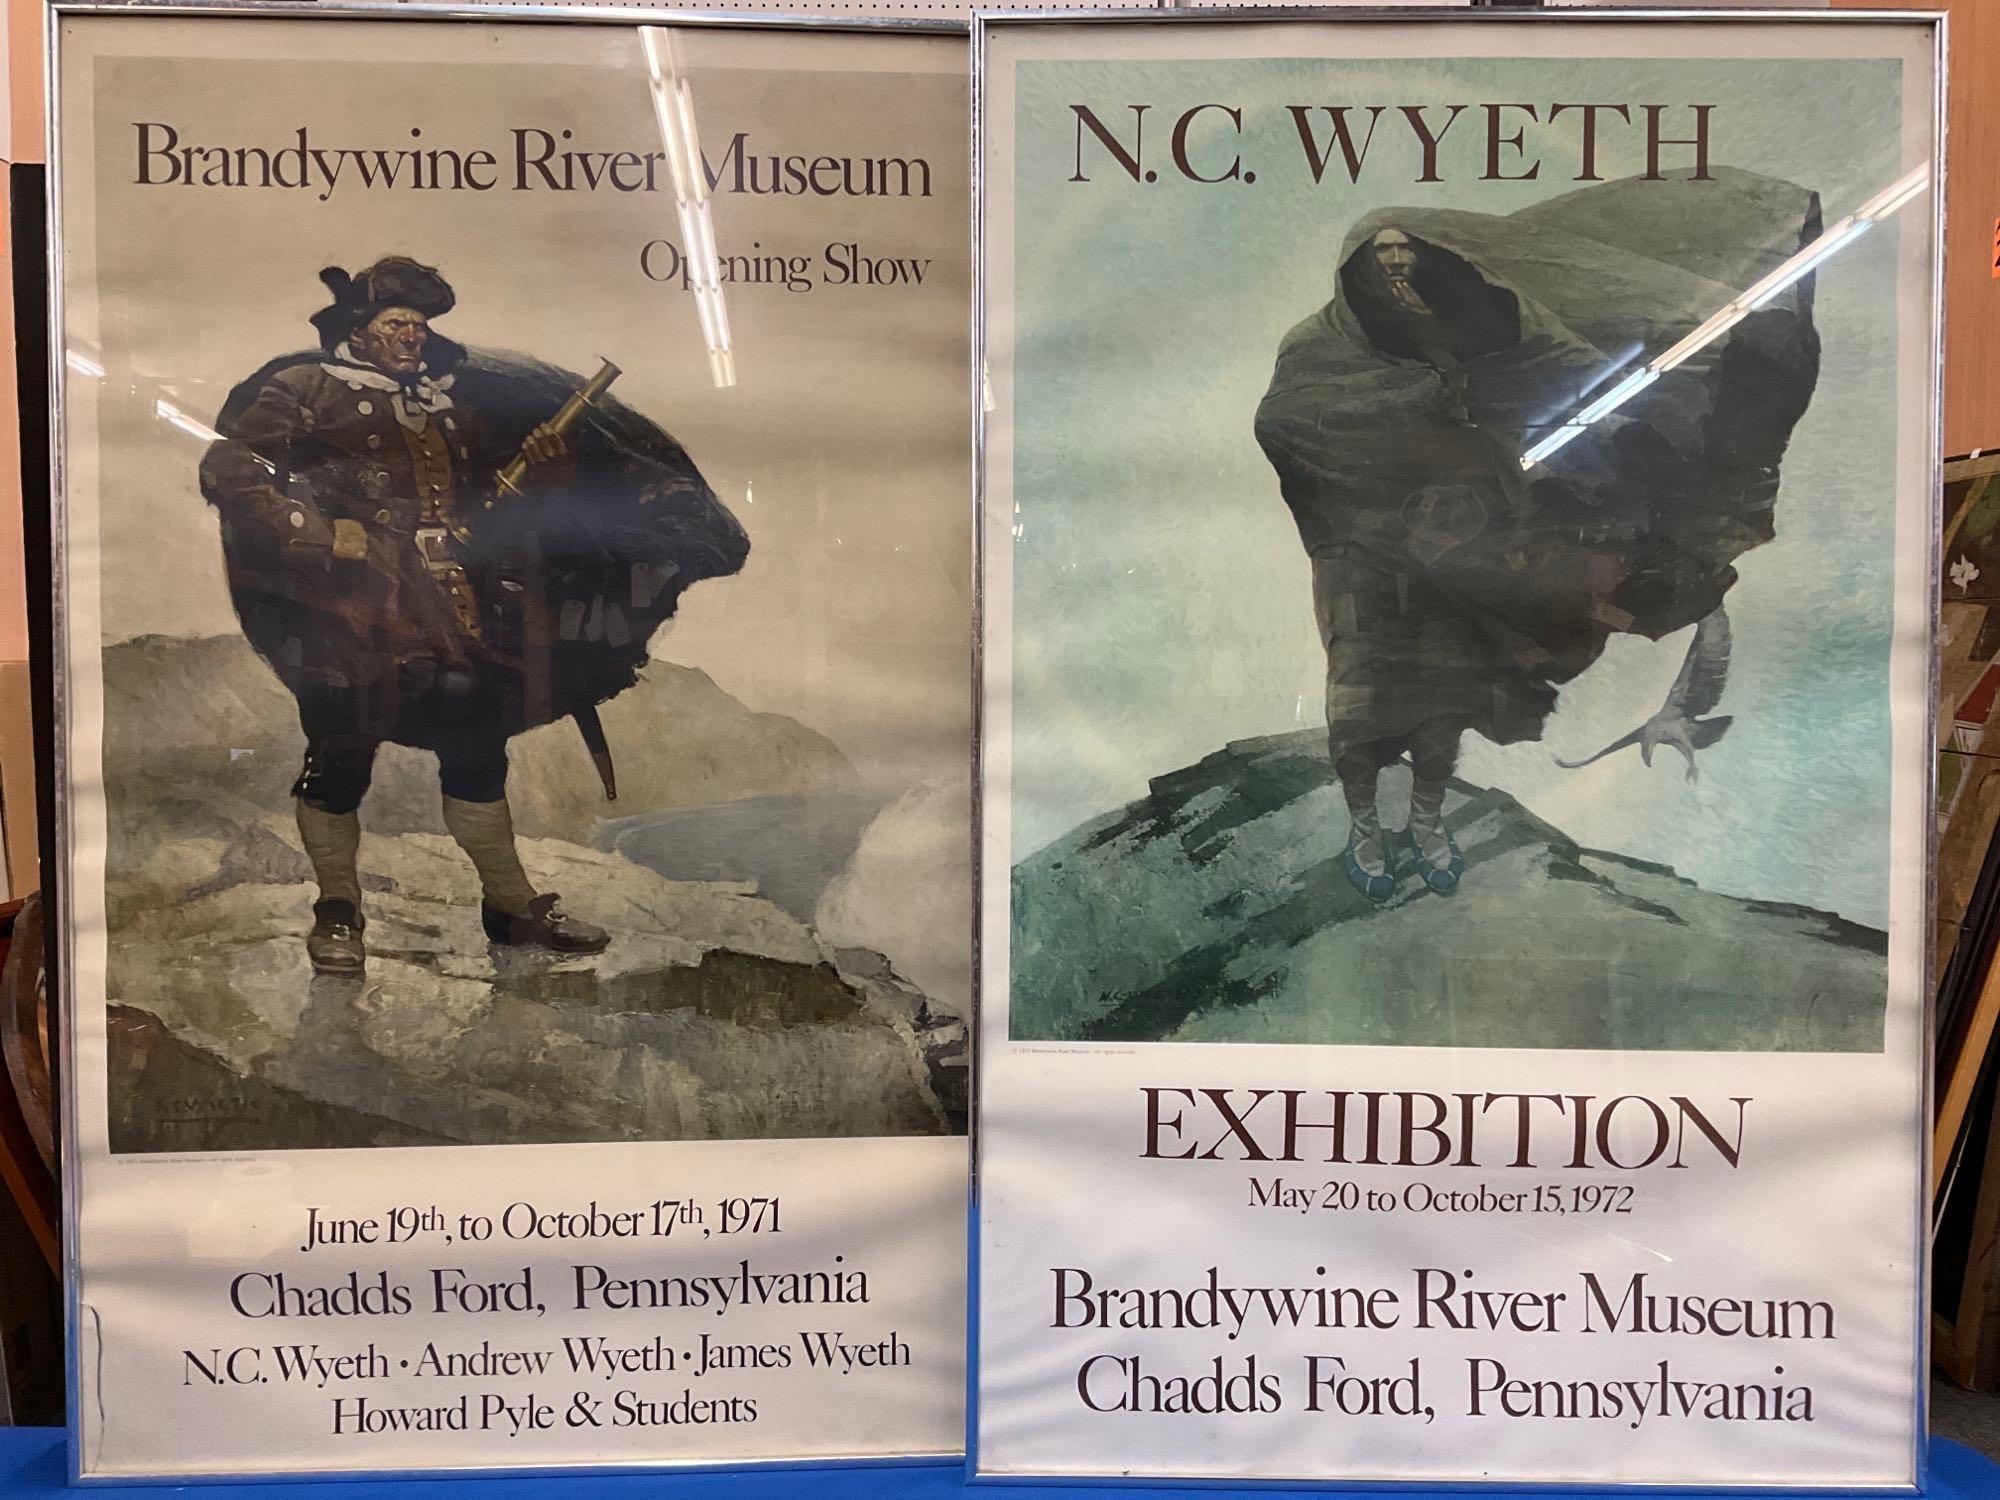 Two N.C. Wyeth Exhibition Posters for Brandywine River Museum by N.C. Wyeth